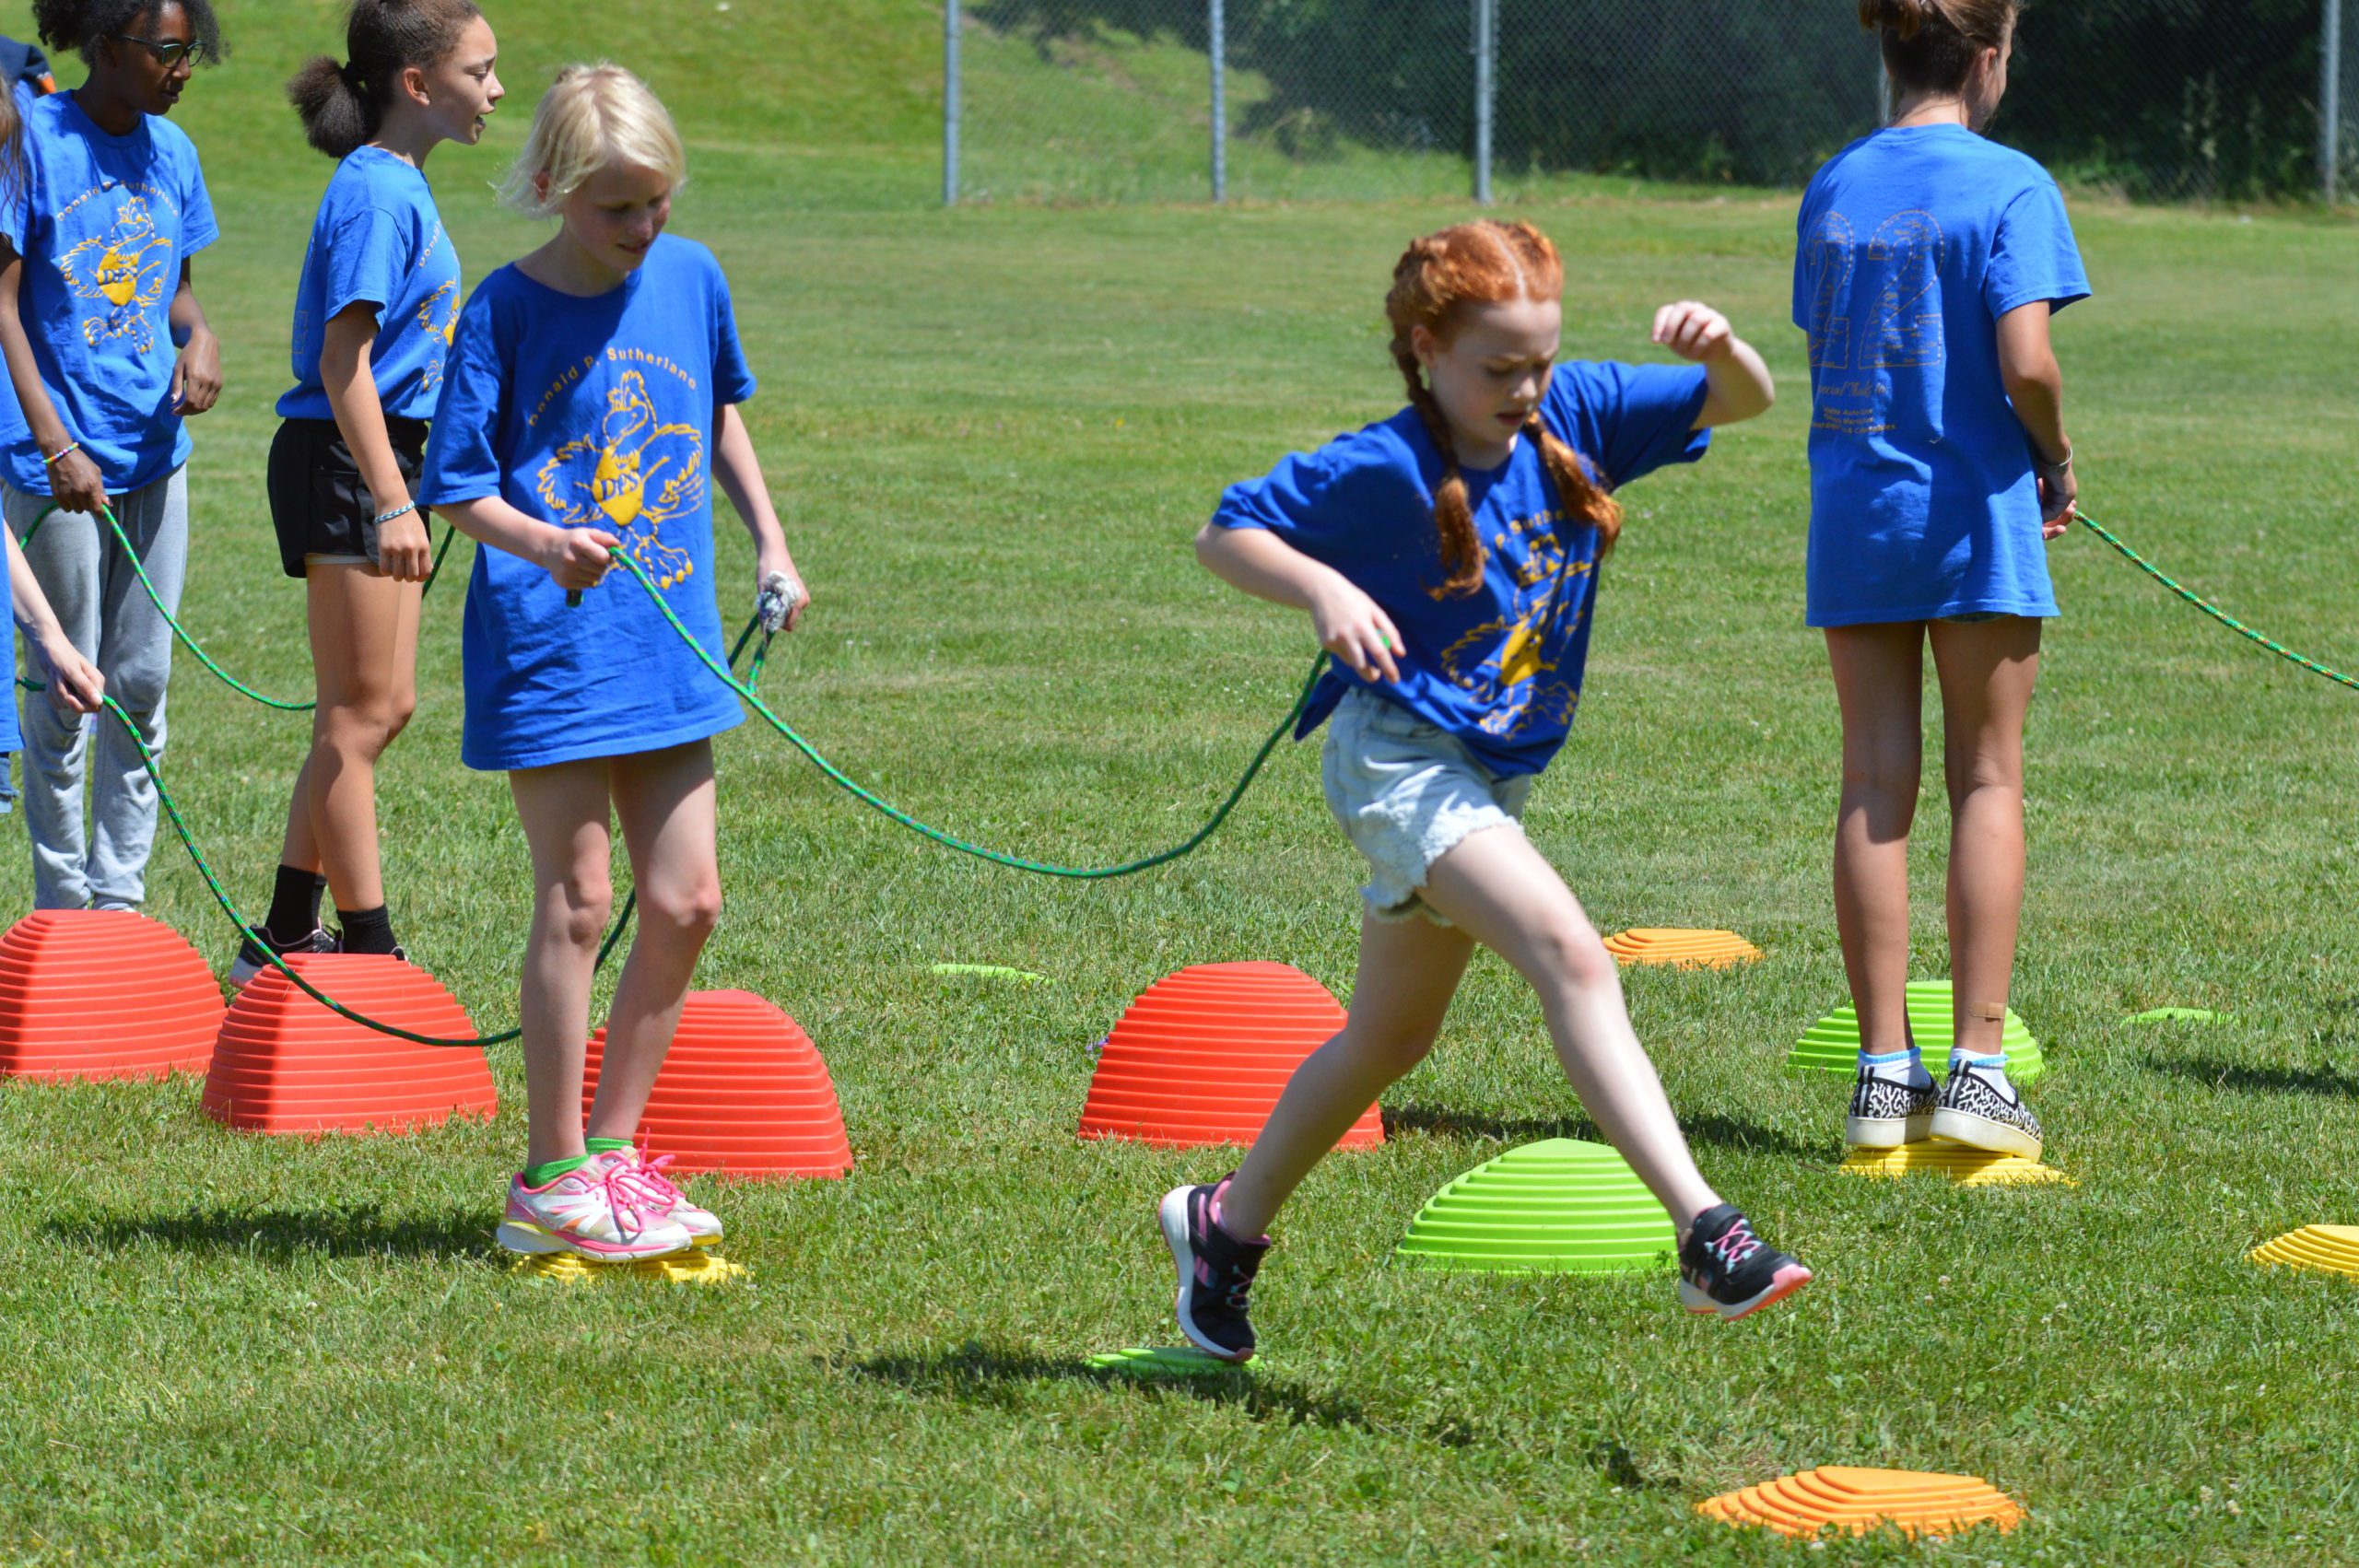 Students playing at DPS Field Day